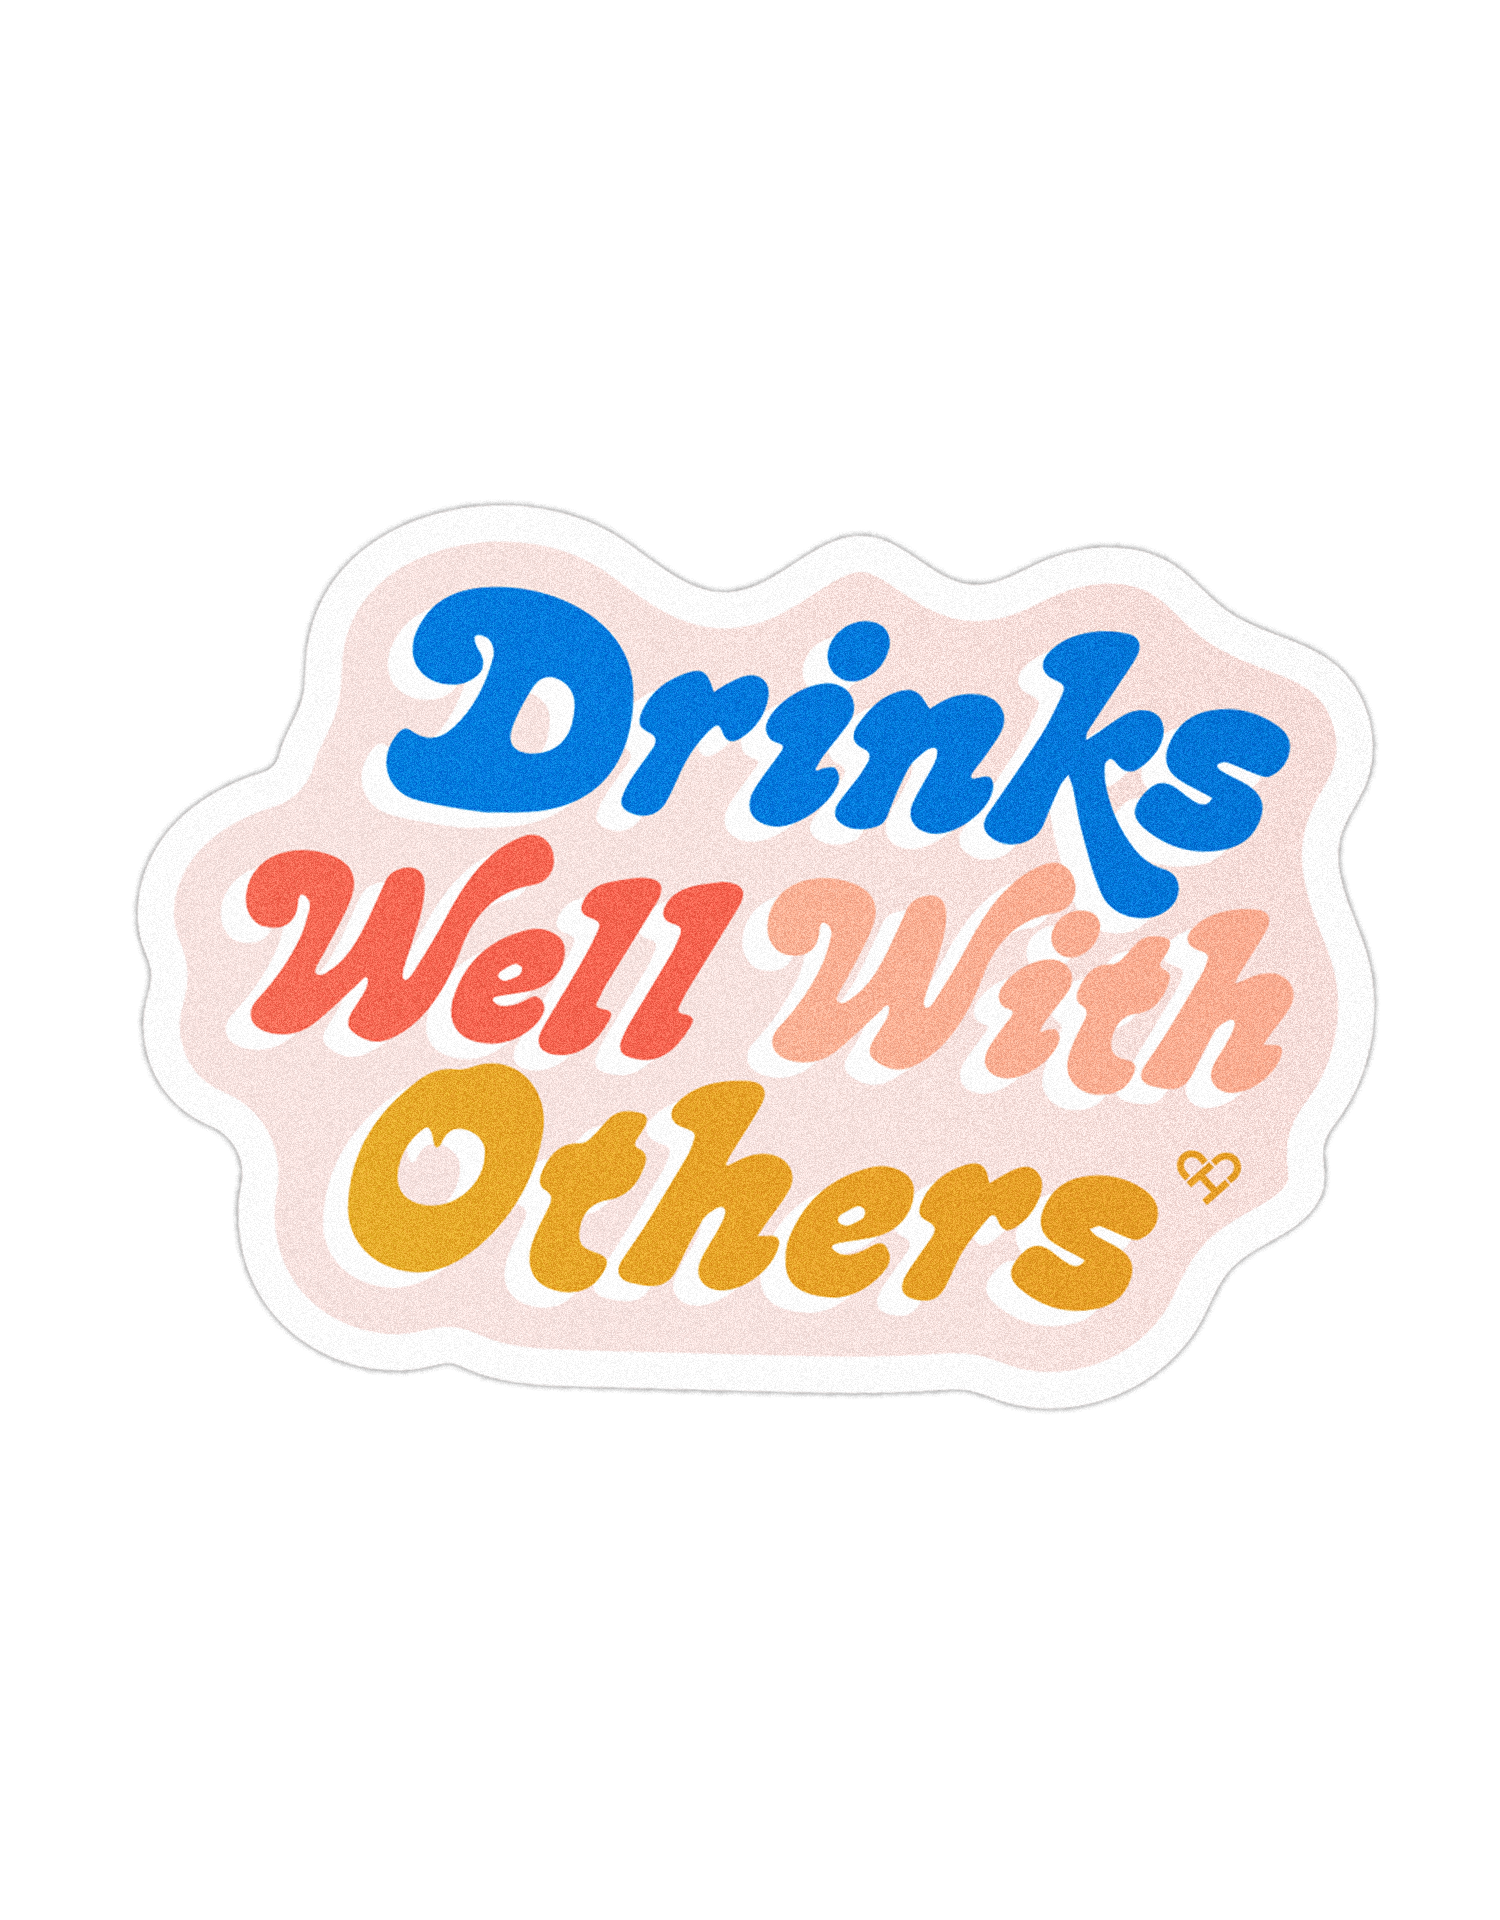 Drinks Well With Others Sticker